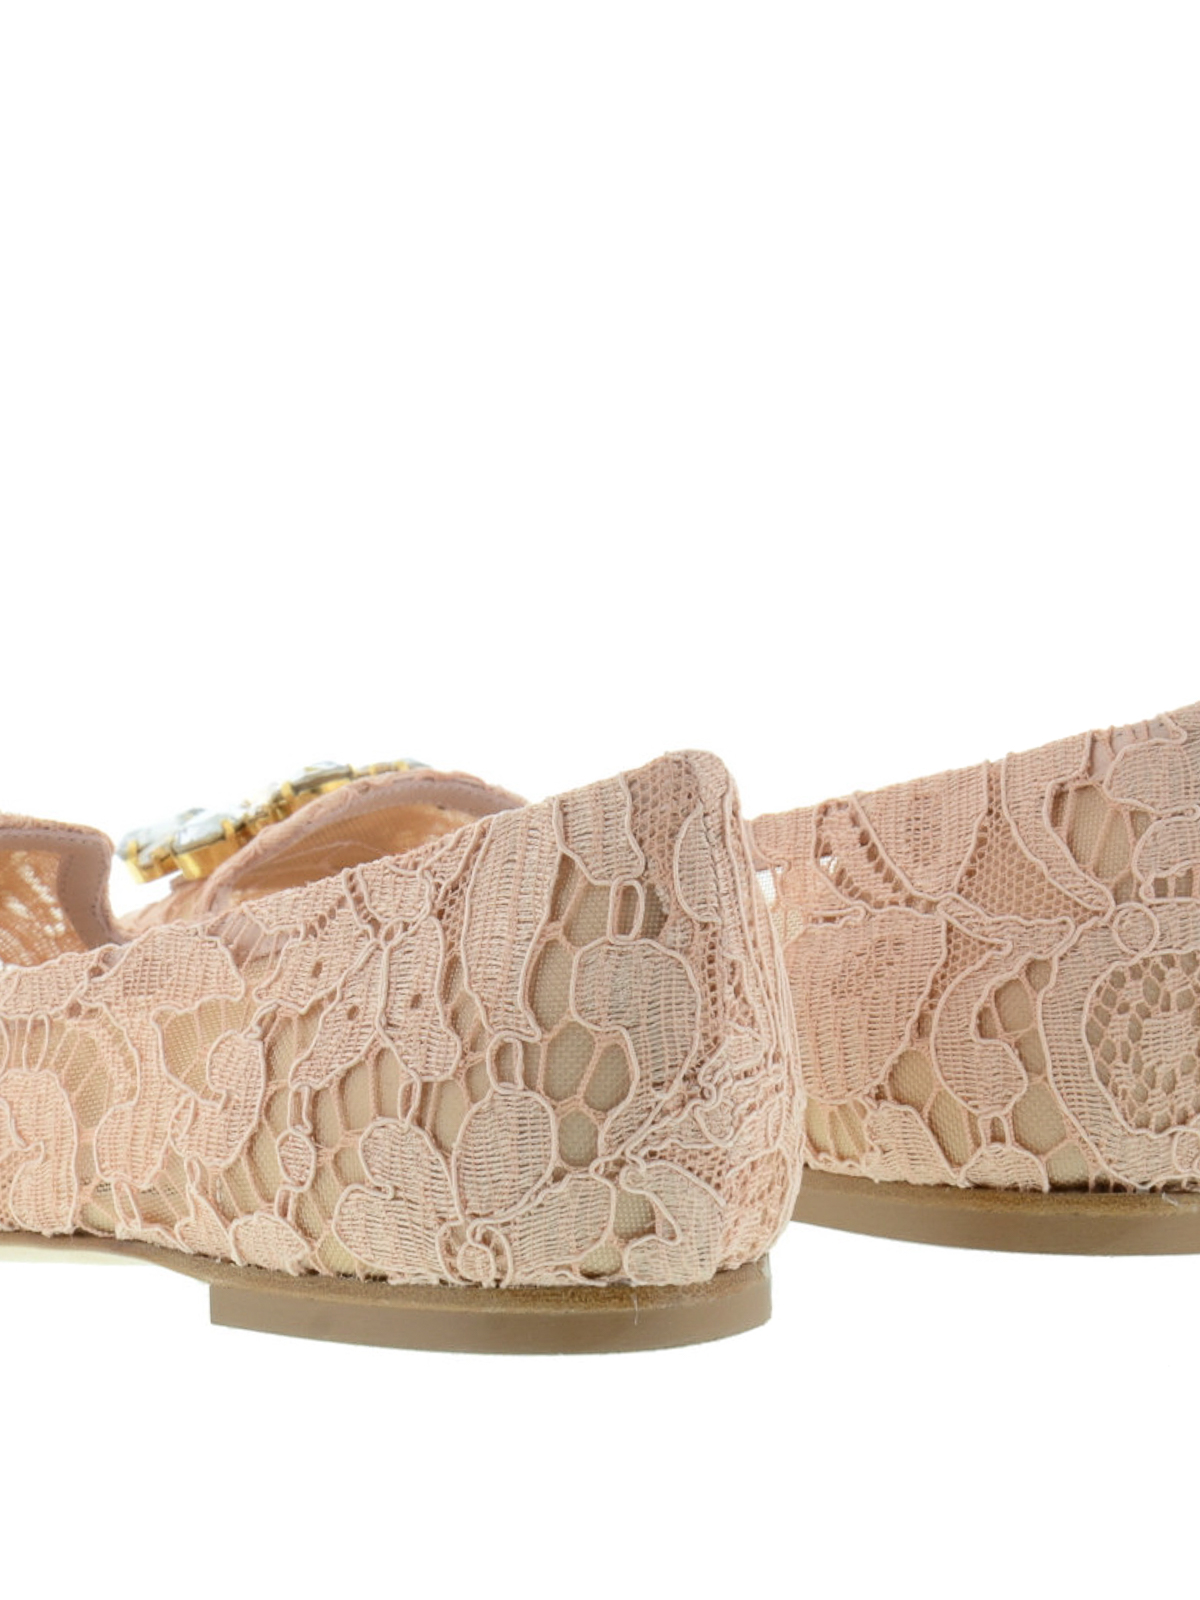 & Slippers Dolce & Gabbana - Vally jewel lace slippers - CP0010AL19880240